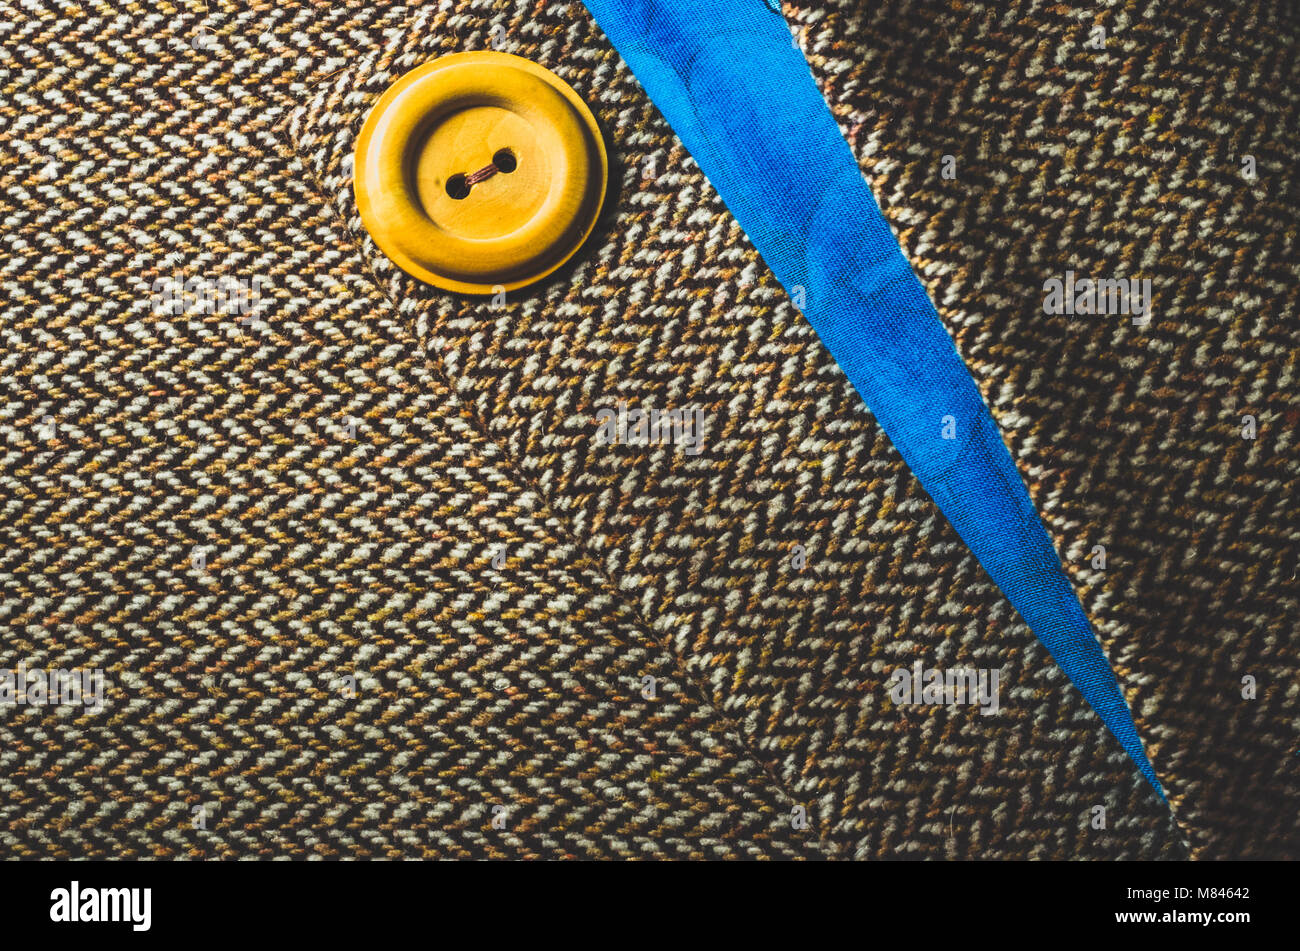 Yellow button on folded brown and blue fabric Stock Photo